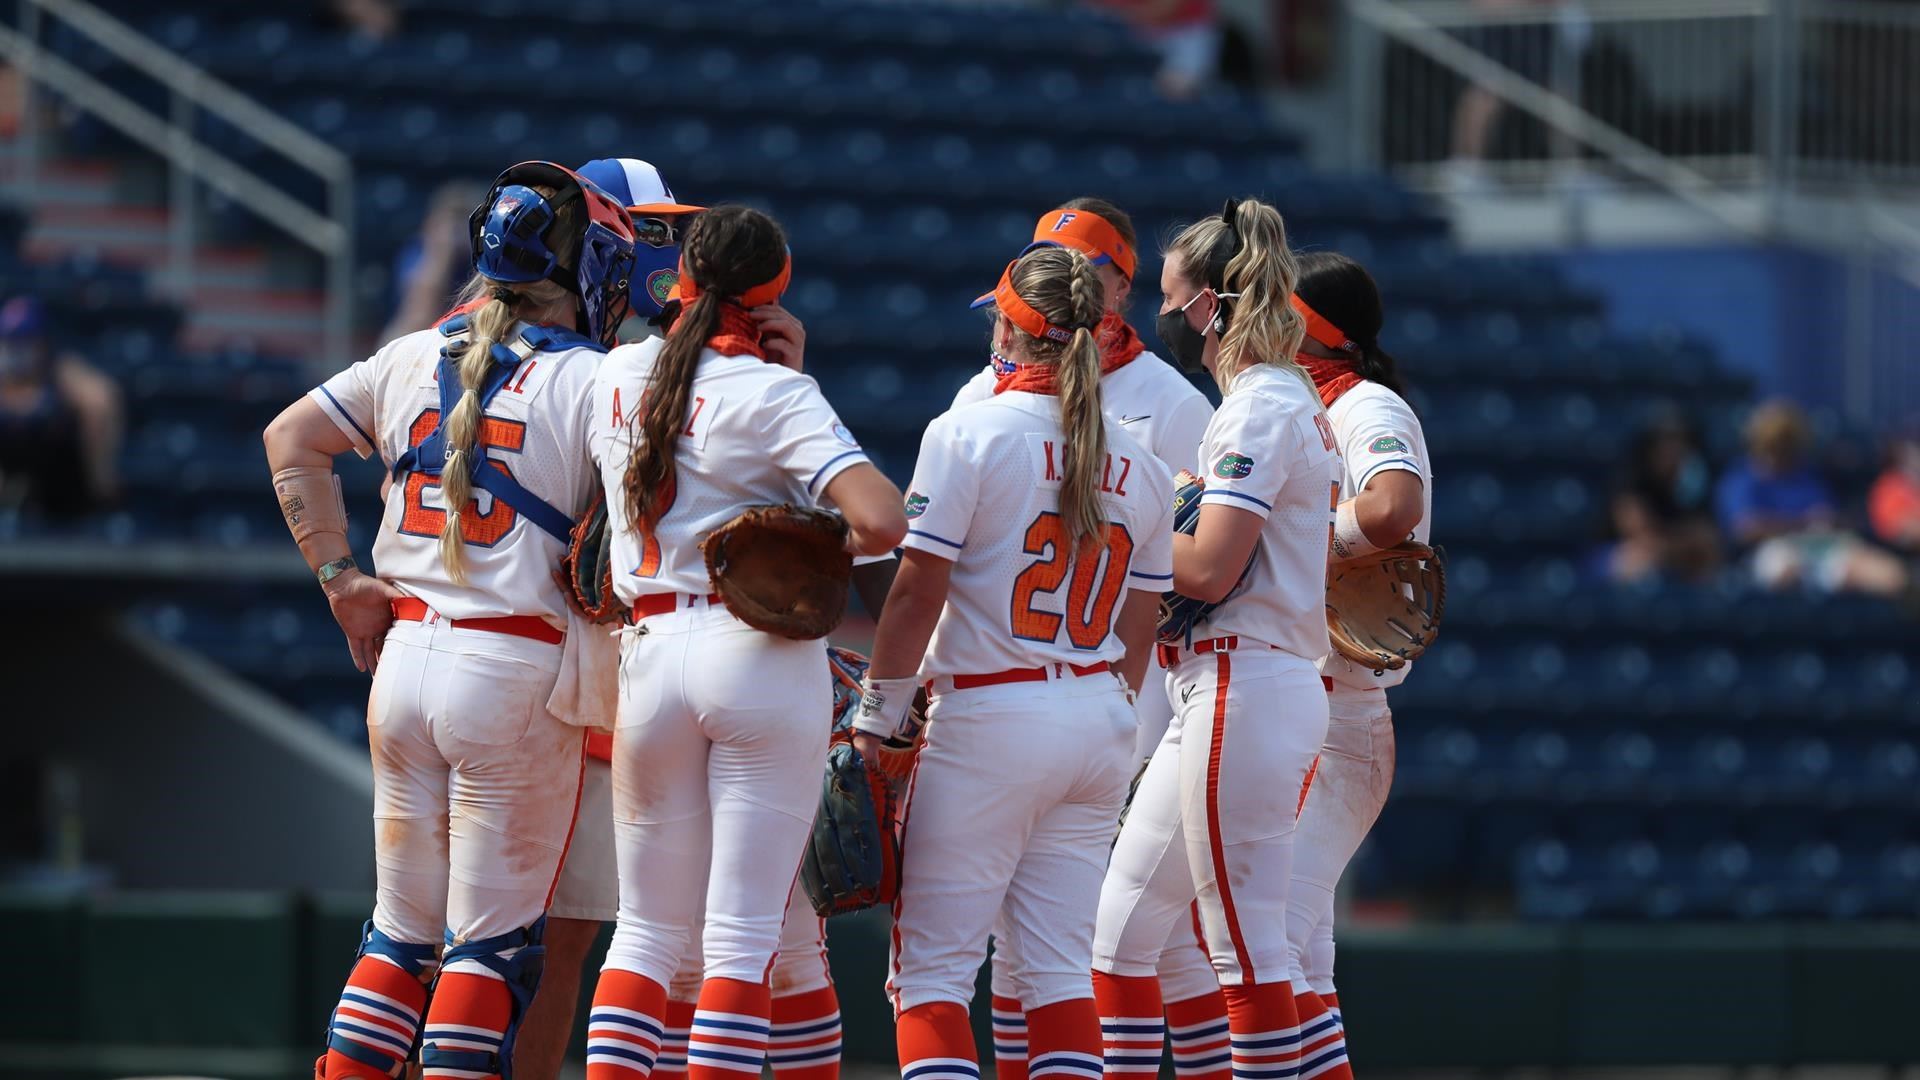 UF Softball No. 6 Gators' LateInning Rally Foiled by No. 9 Wildcats